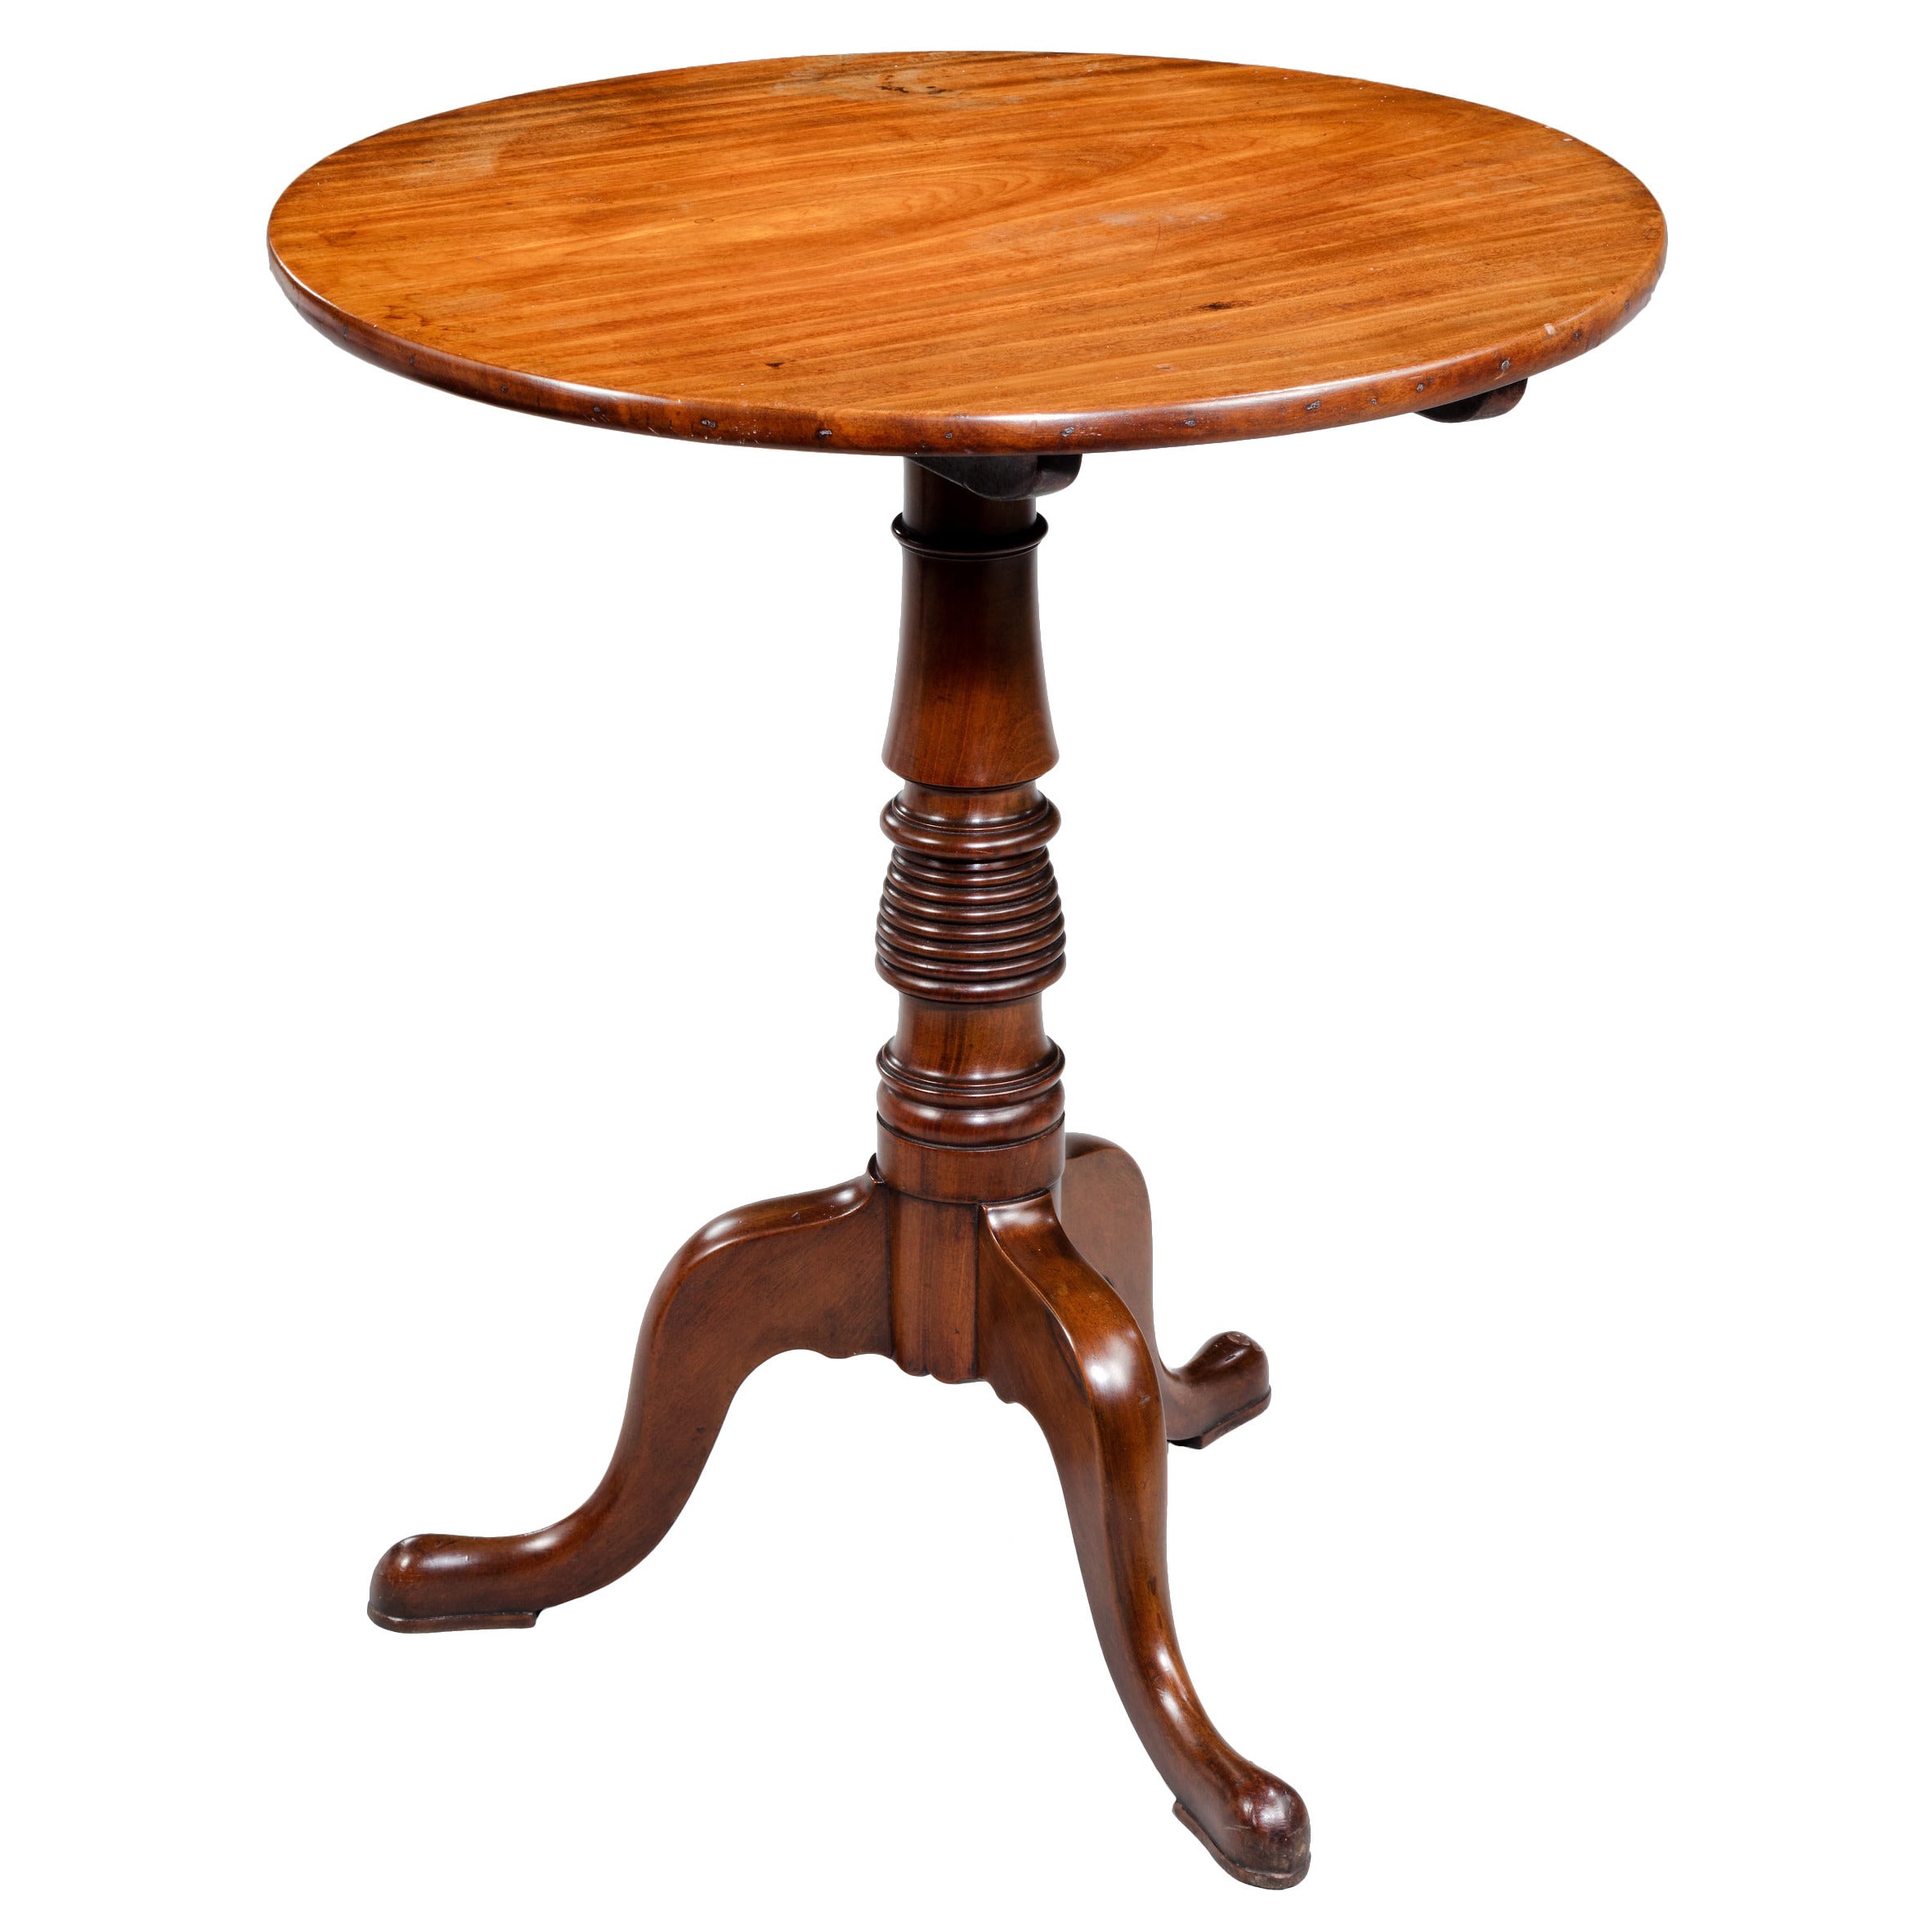 George III Period Mahogany Tilt Table with Beehive Central Section